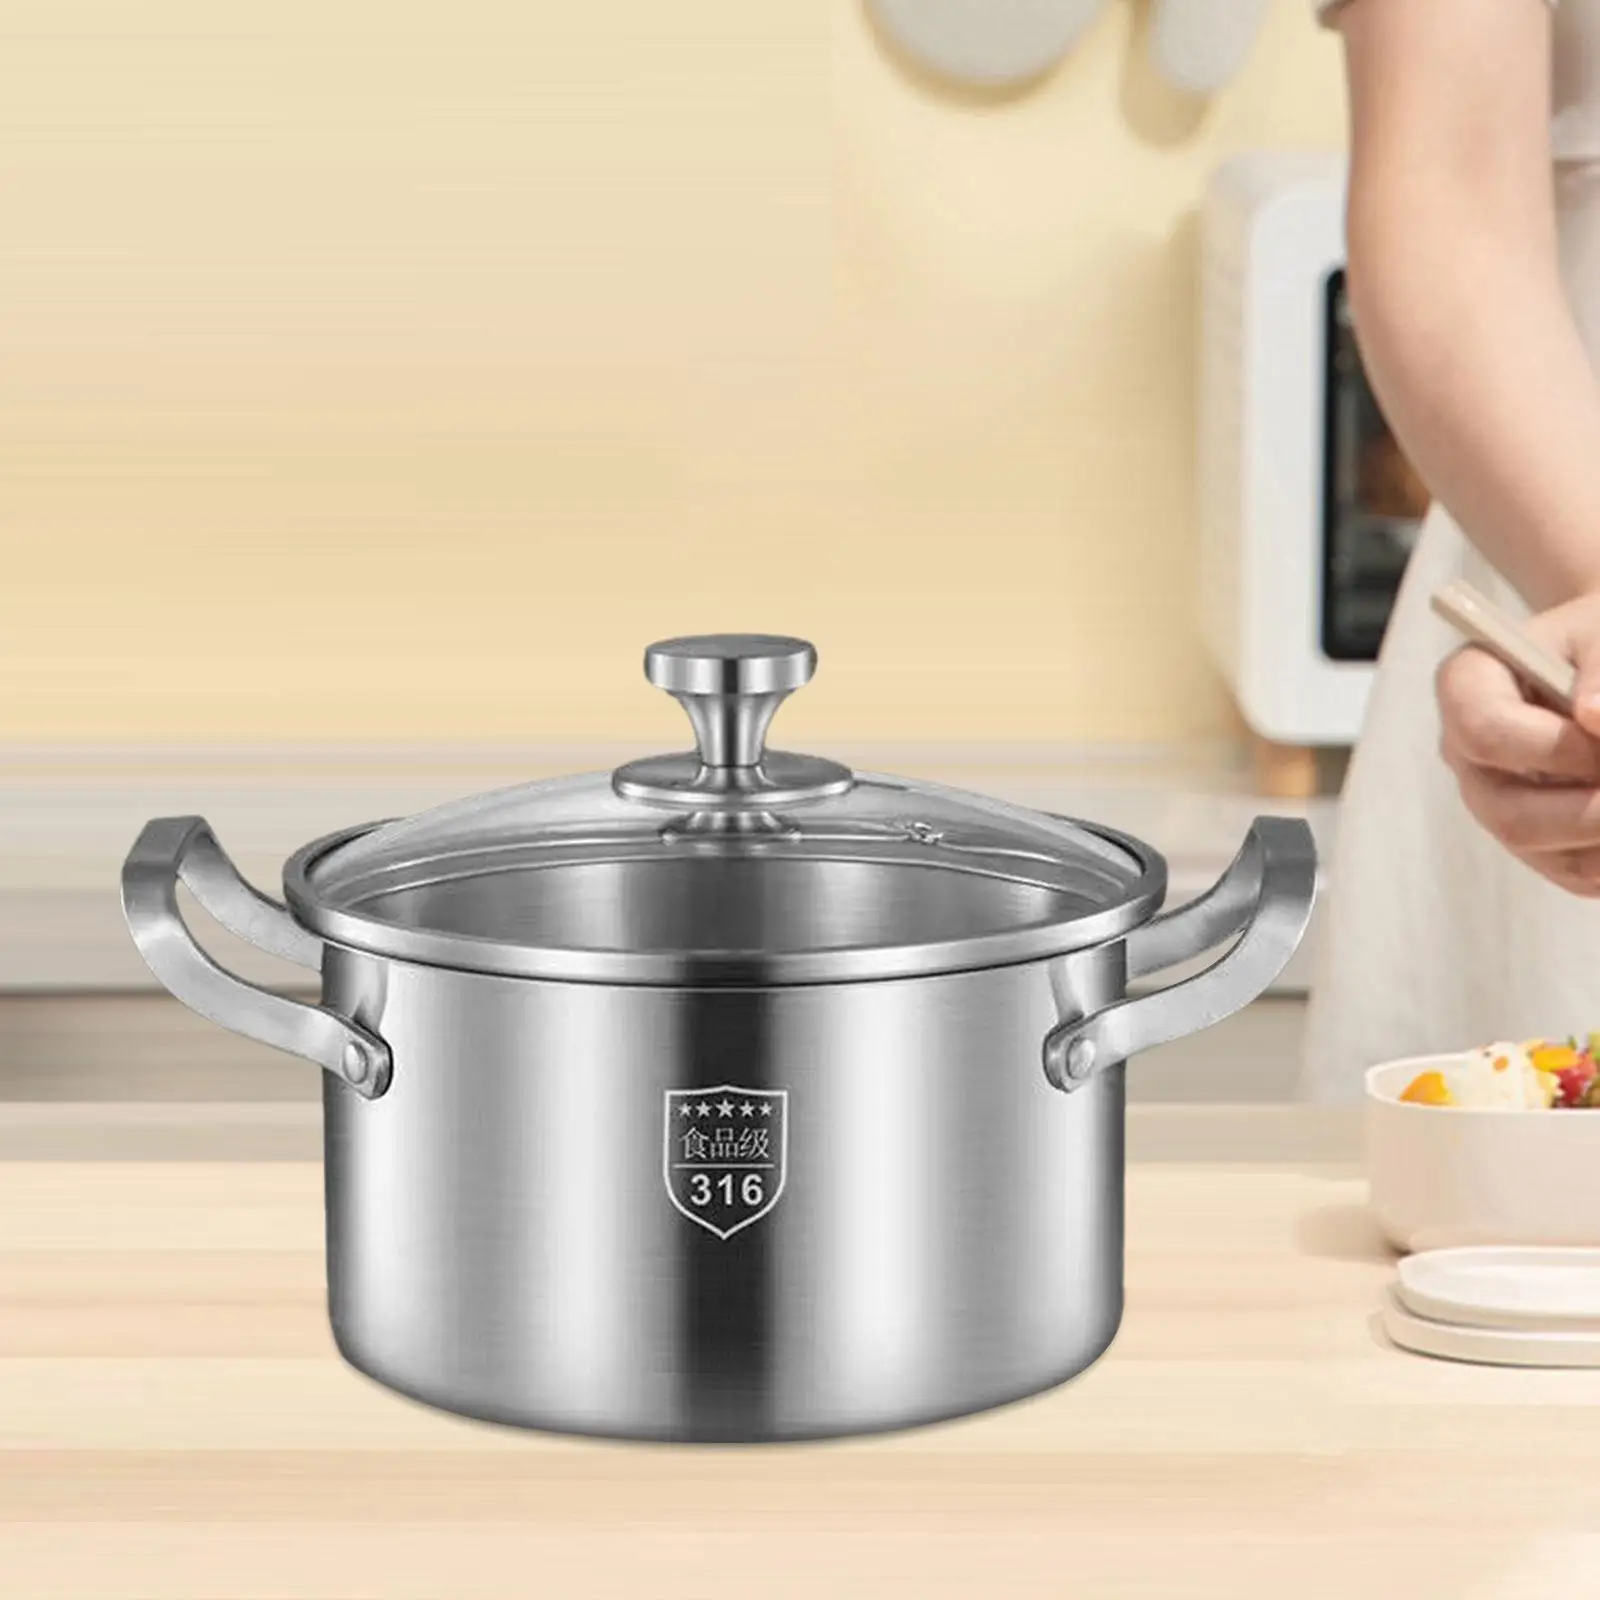 Soup Pot Cookware Portable Works Nonstick Pan Cooking Tools Stockpot with Lid Kitchen Pot for Home Bar Restaurant Kitchen